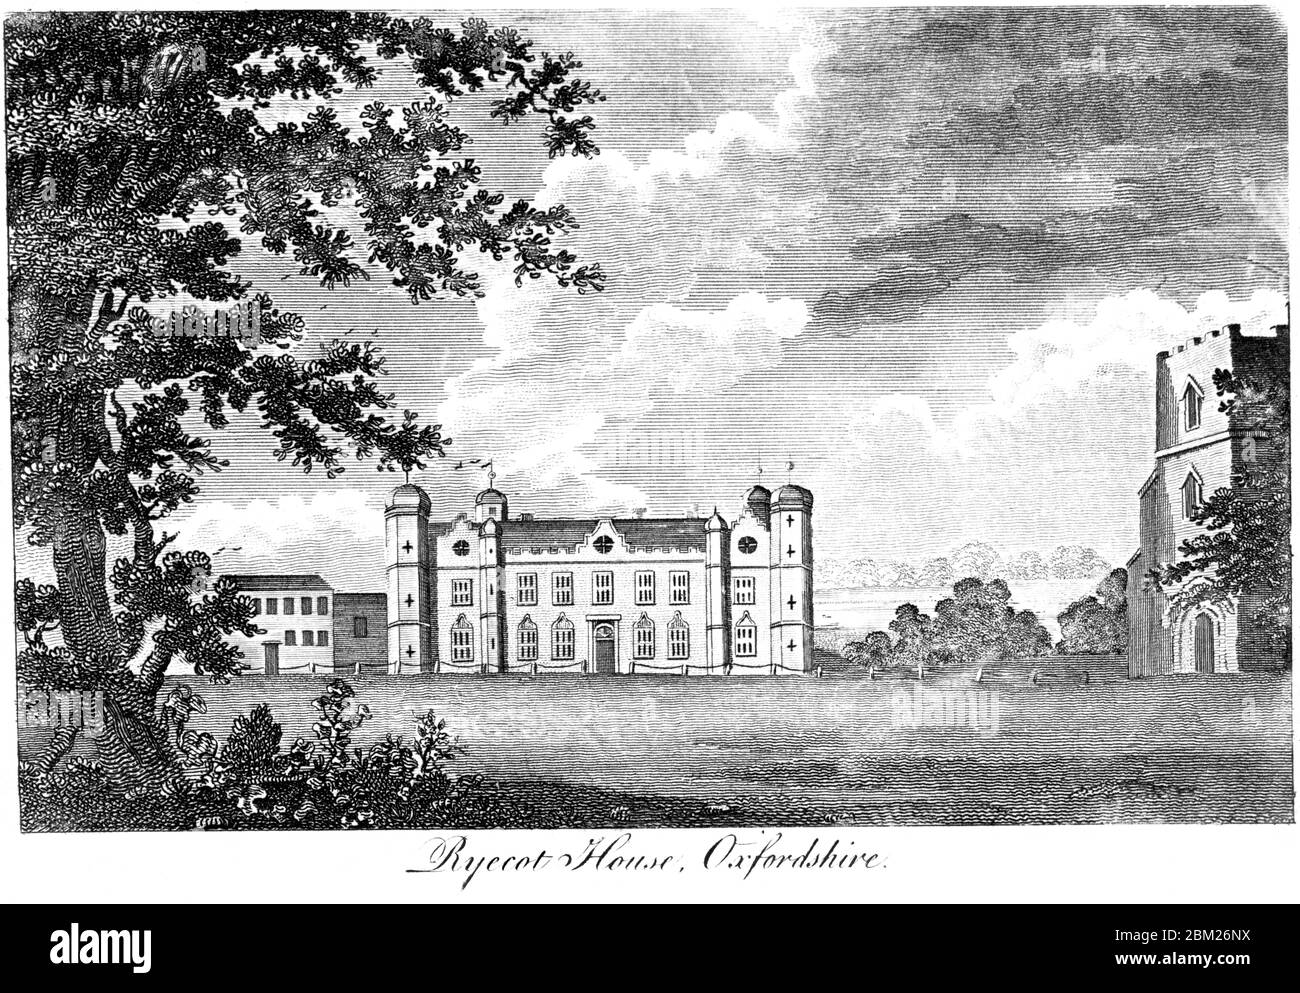 An engraving of Ryecot House (Rycote House) Oxfordshire scanned at high resolution from a book printed in 1827. Believed copyright free. Stock Photo